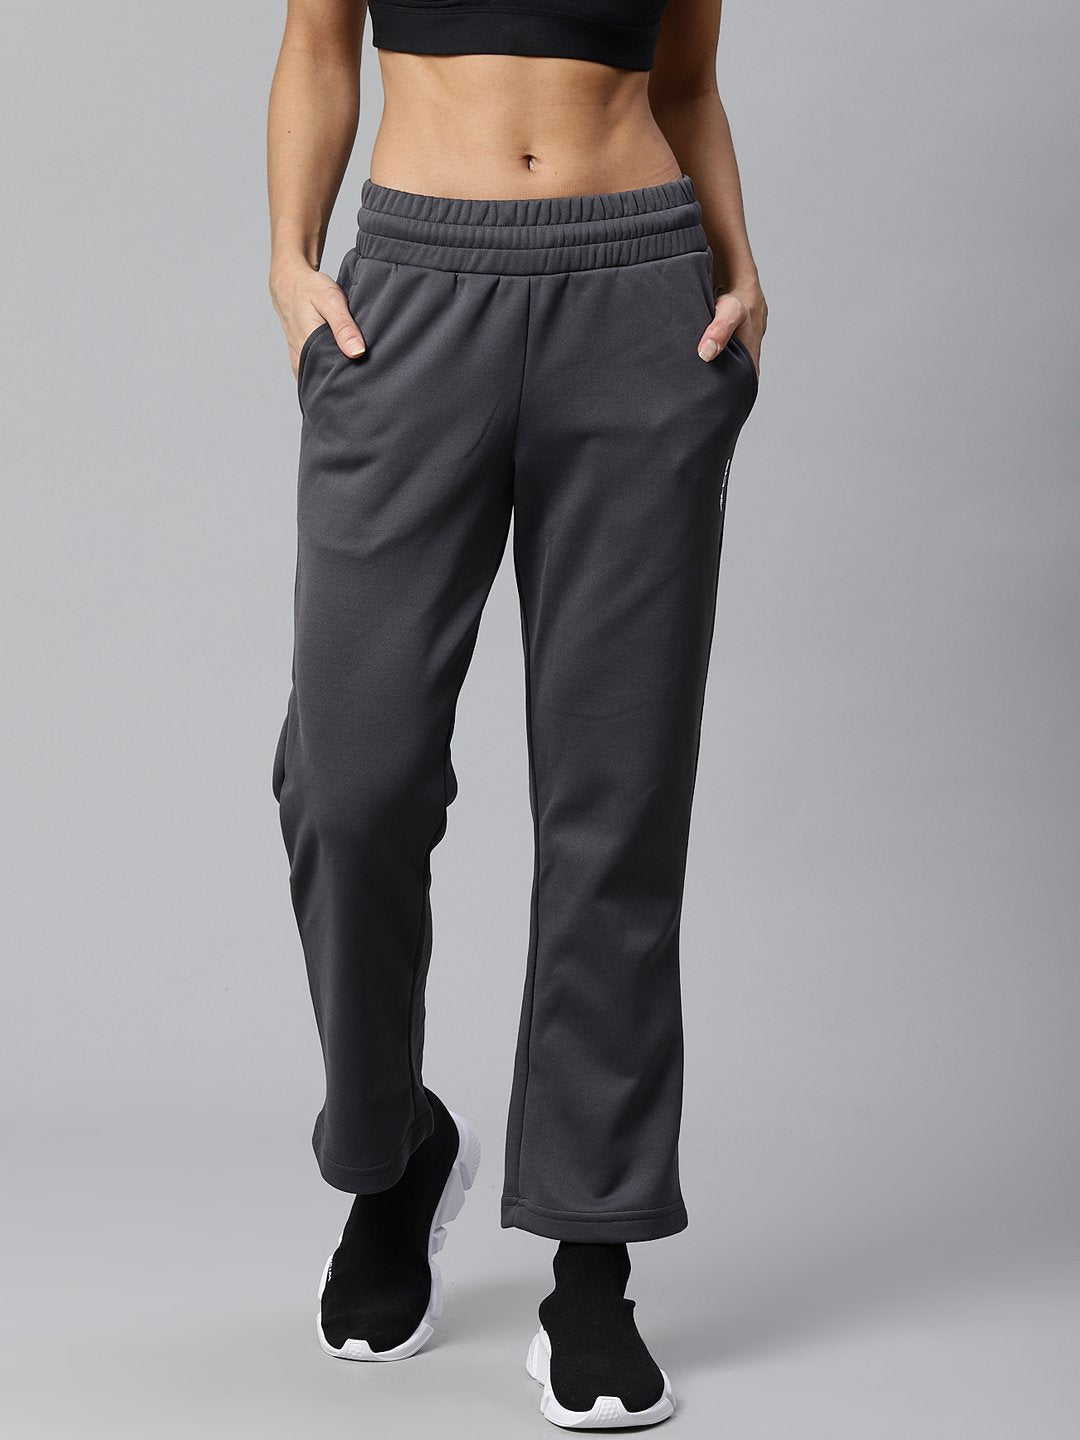 Alcis Women Charcoal Grey Solid Cropped Track Pants ALWSTPN02003-S